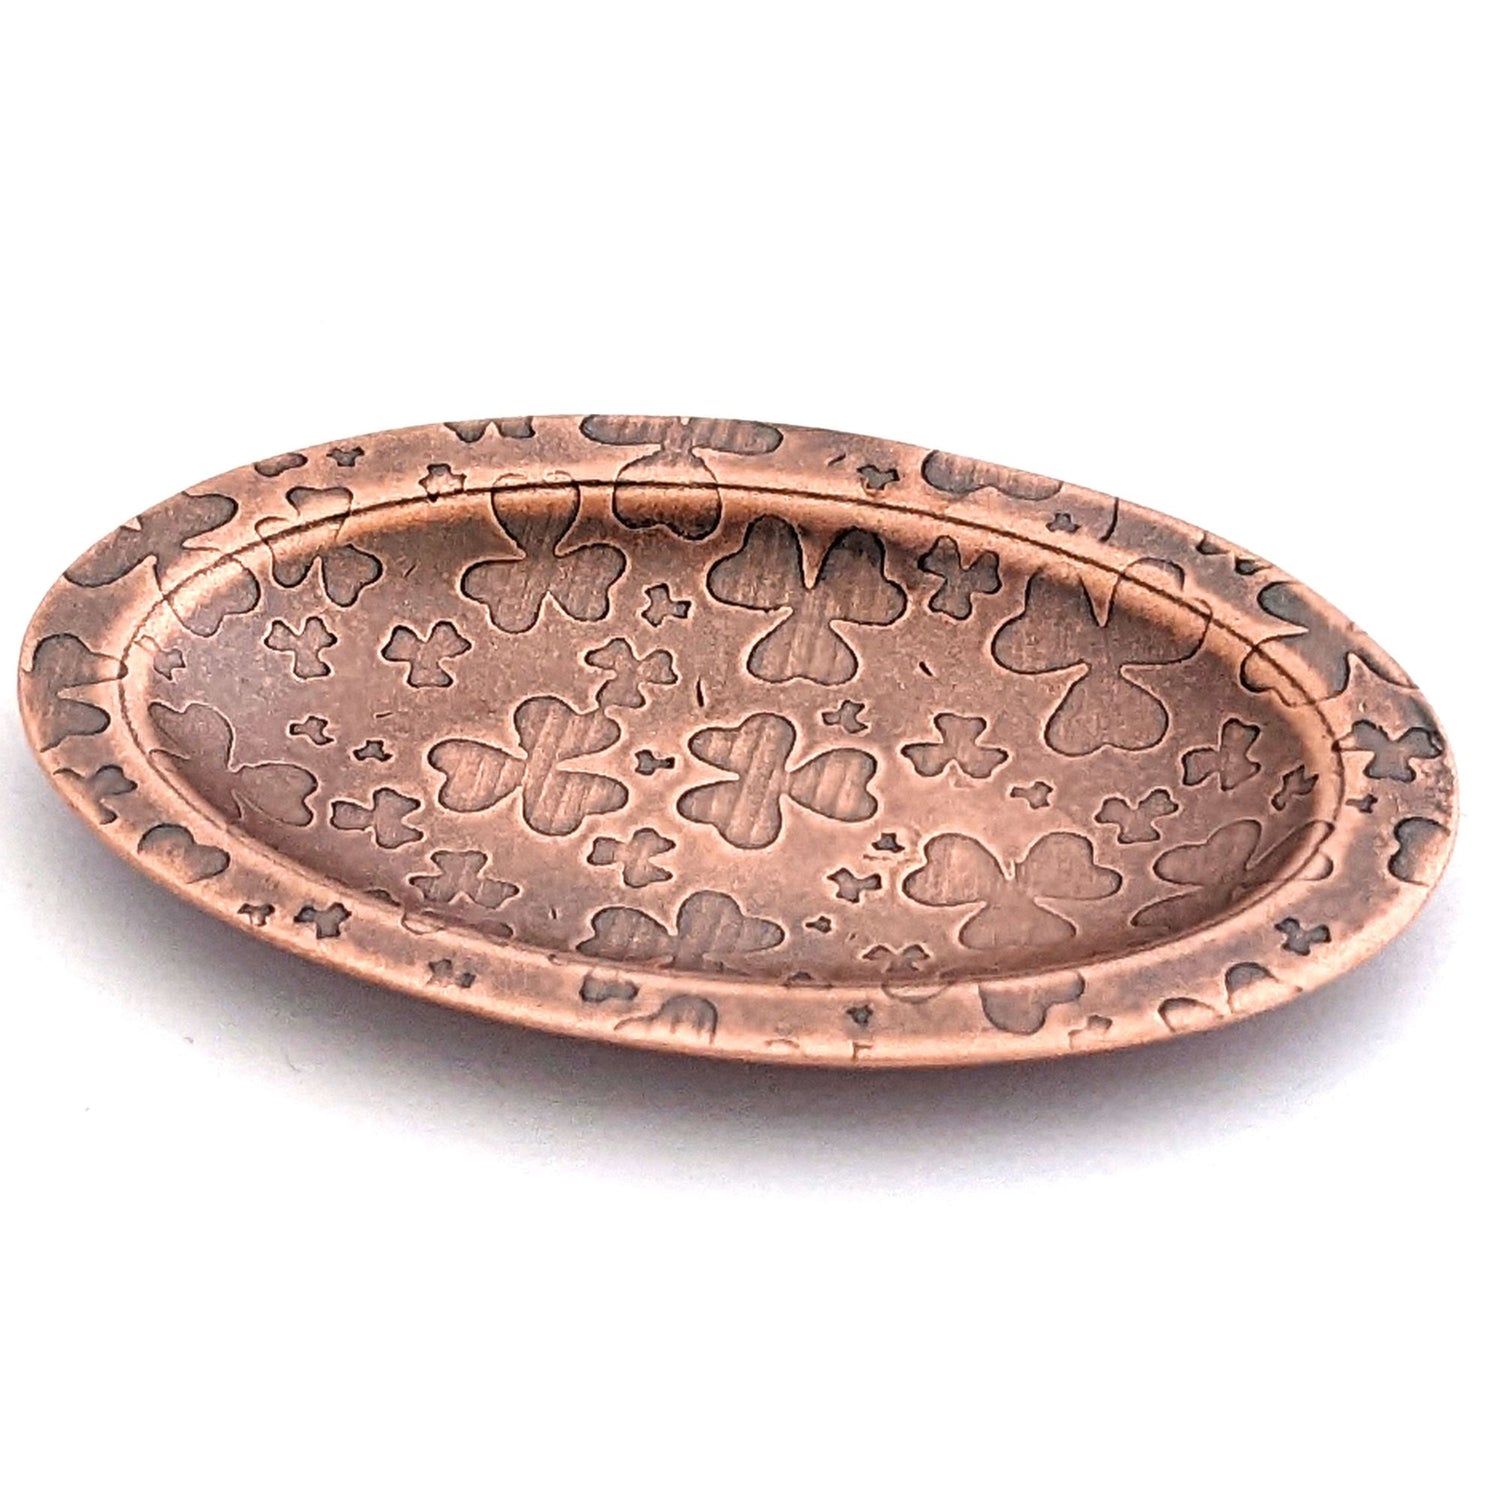 Copper oval ring dish with repeating pattern of shamrocks.  Dish is 2 inches by three inches with a raised lip.